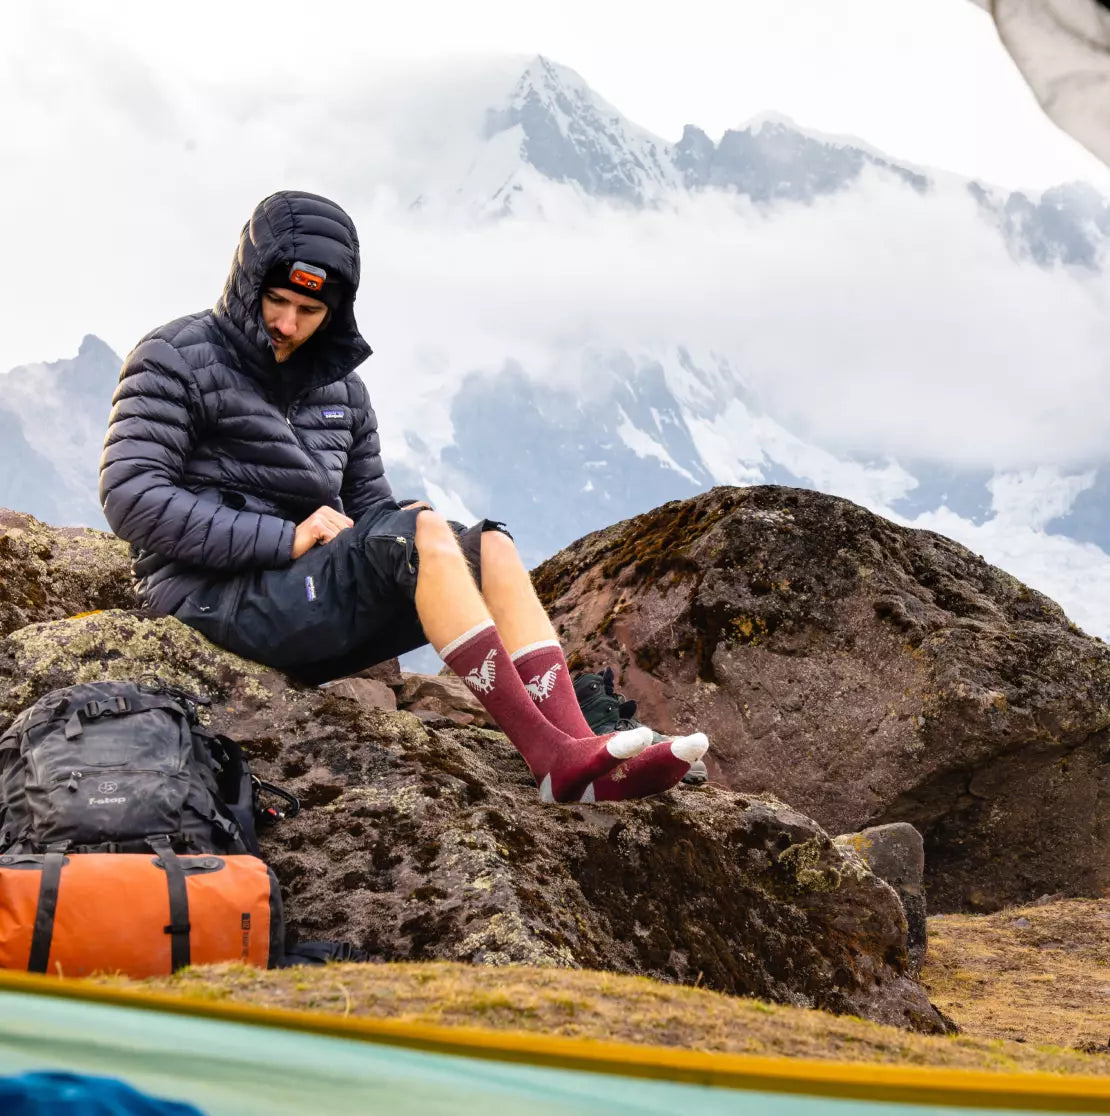 A man wearing our Condor socks in the Andes mountains.